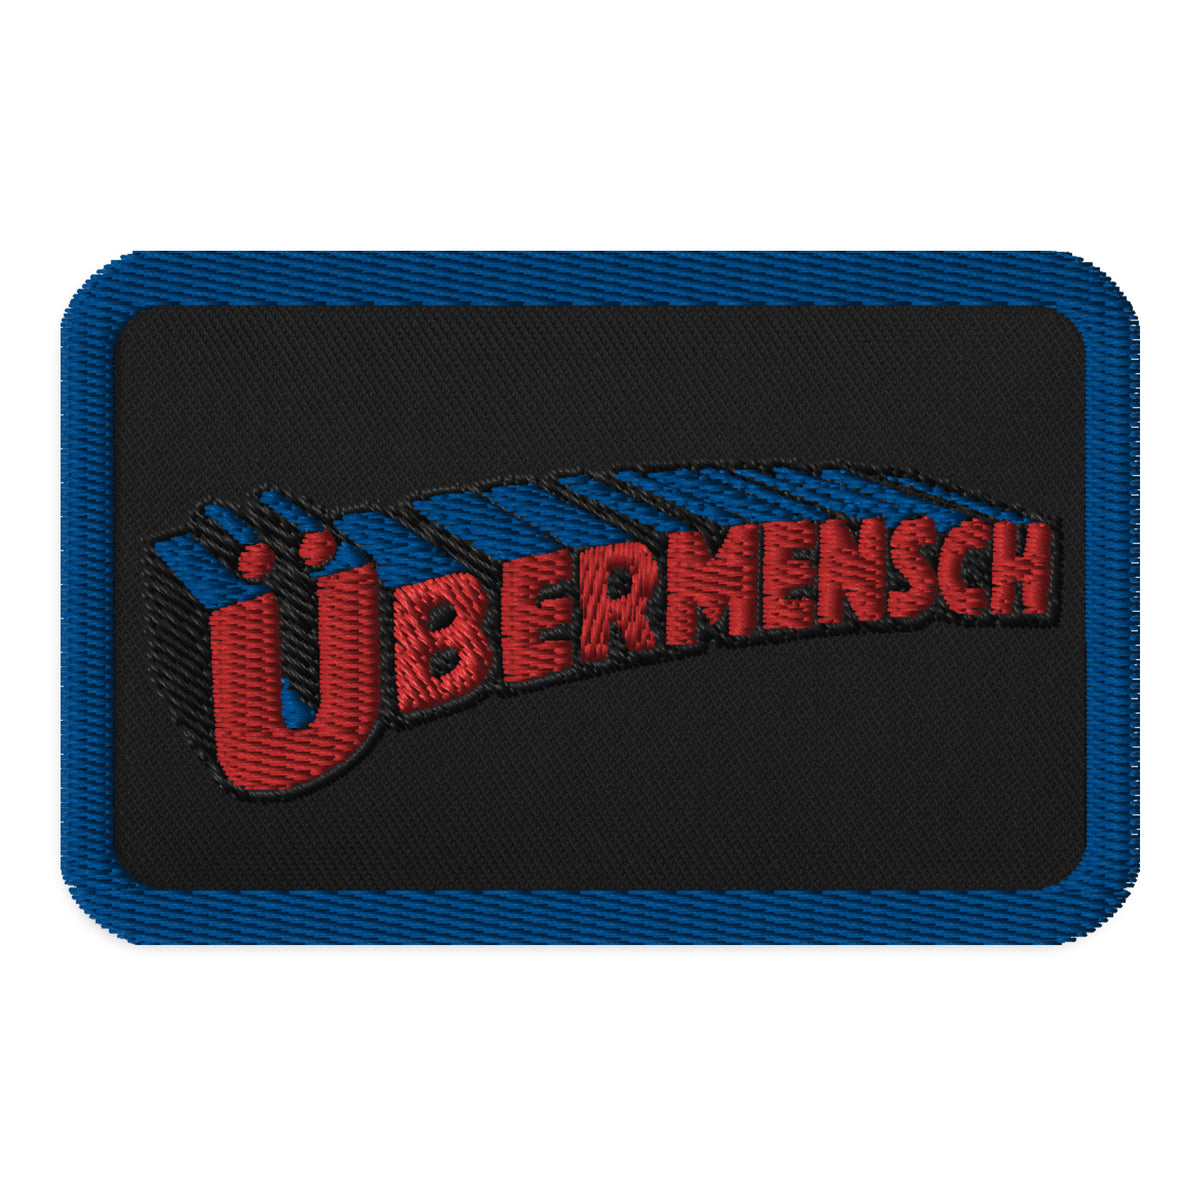 Ubermensch Embroidered Morale Patch